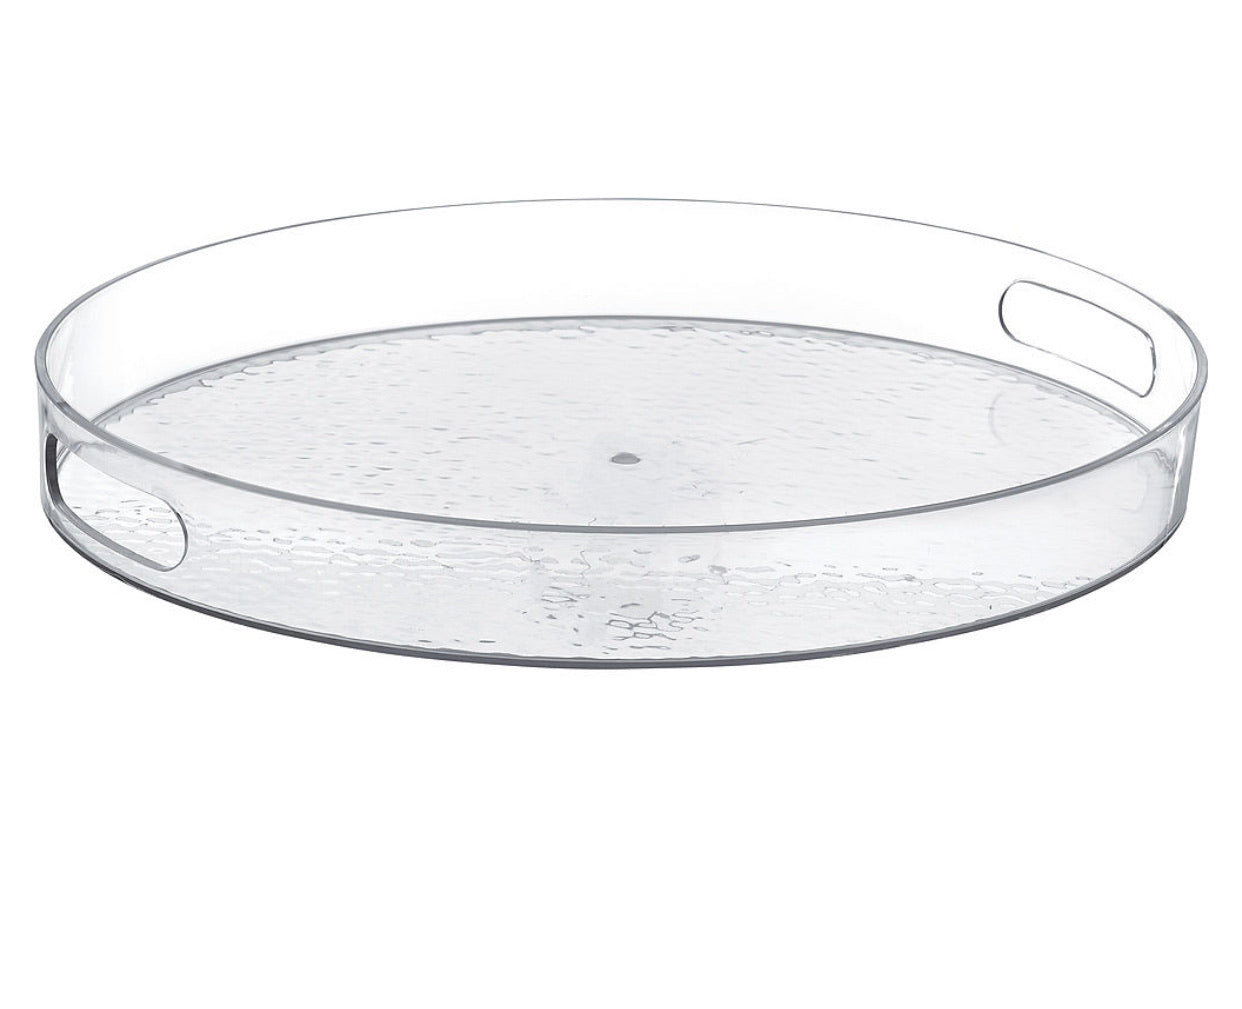 CLEAR Premium Plastic Hammered Serving Tray Set of 2(1957RR)